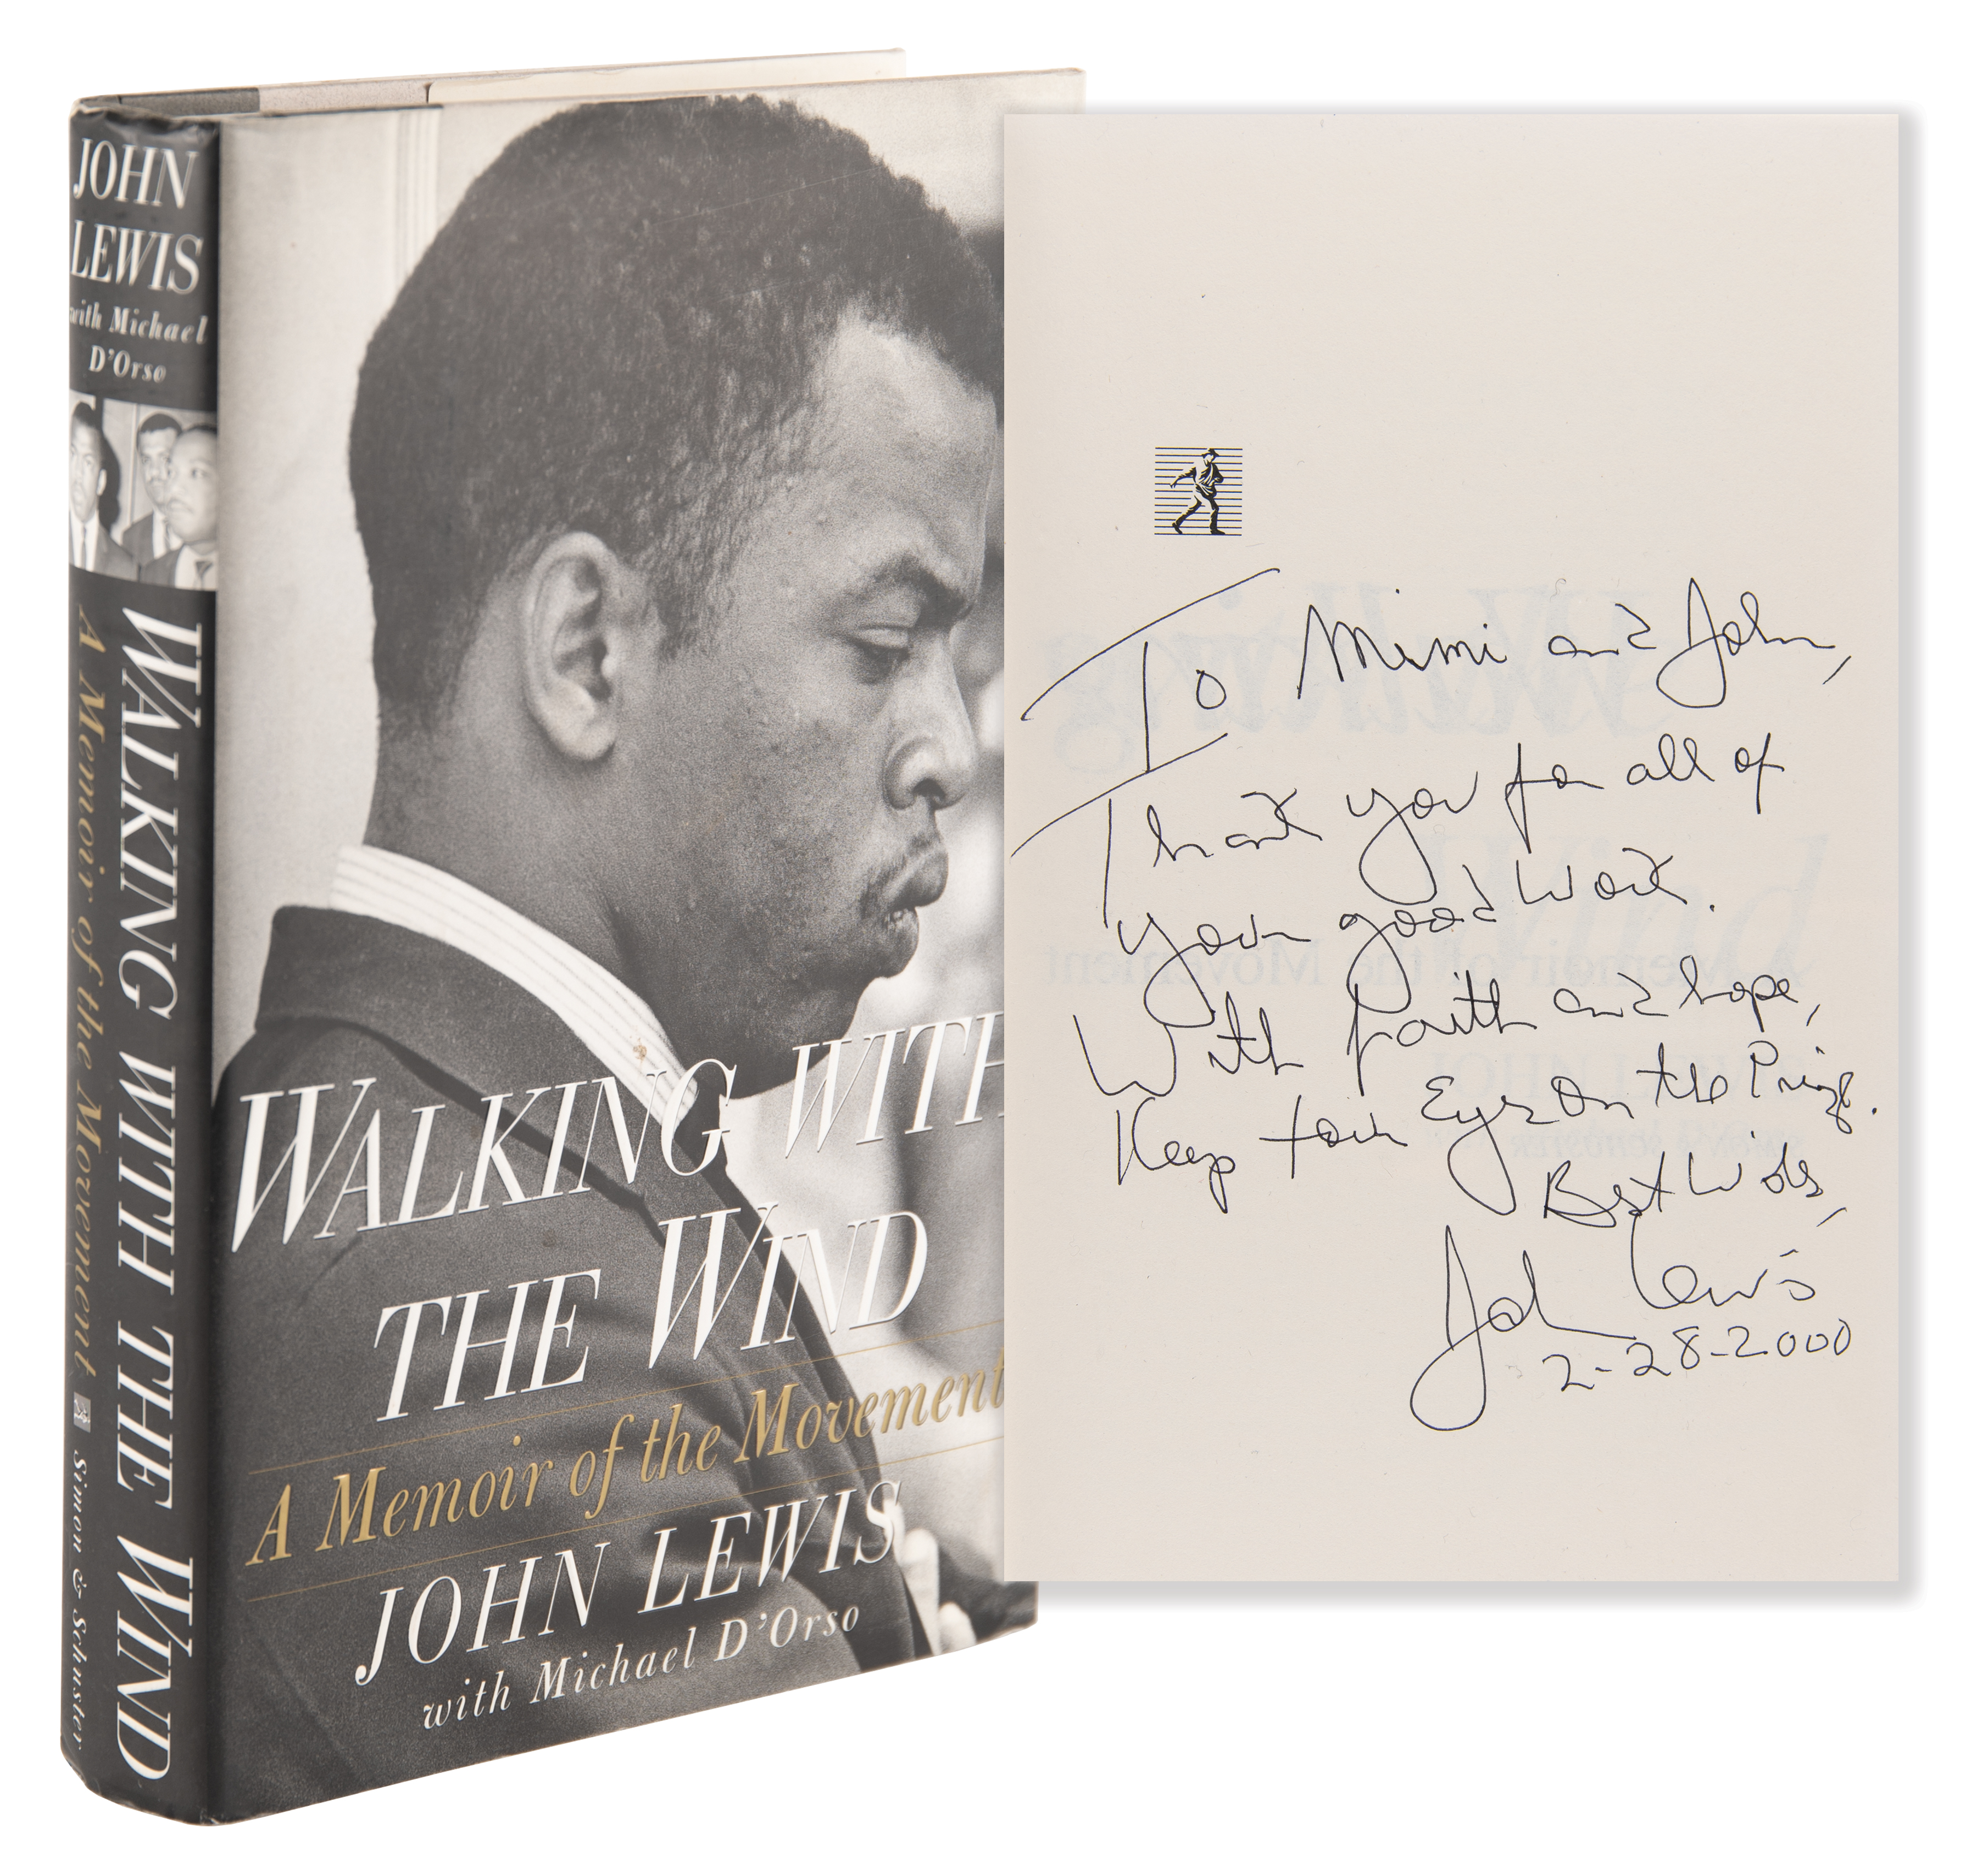 Lot #371 John Lewis Signed Book - Walking With the